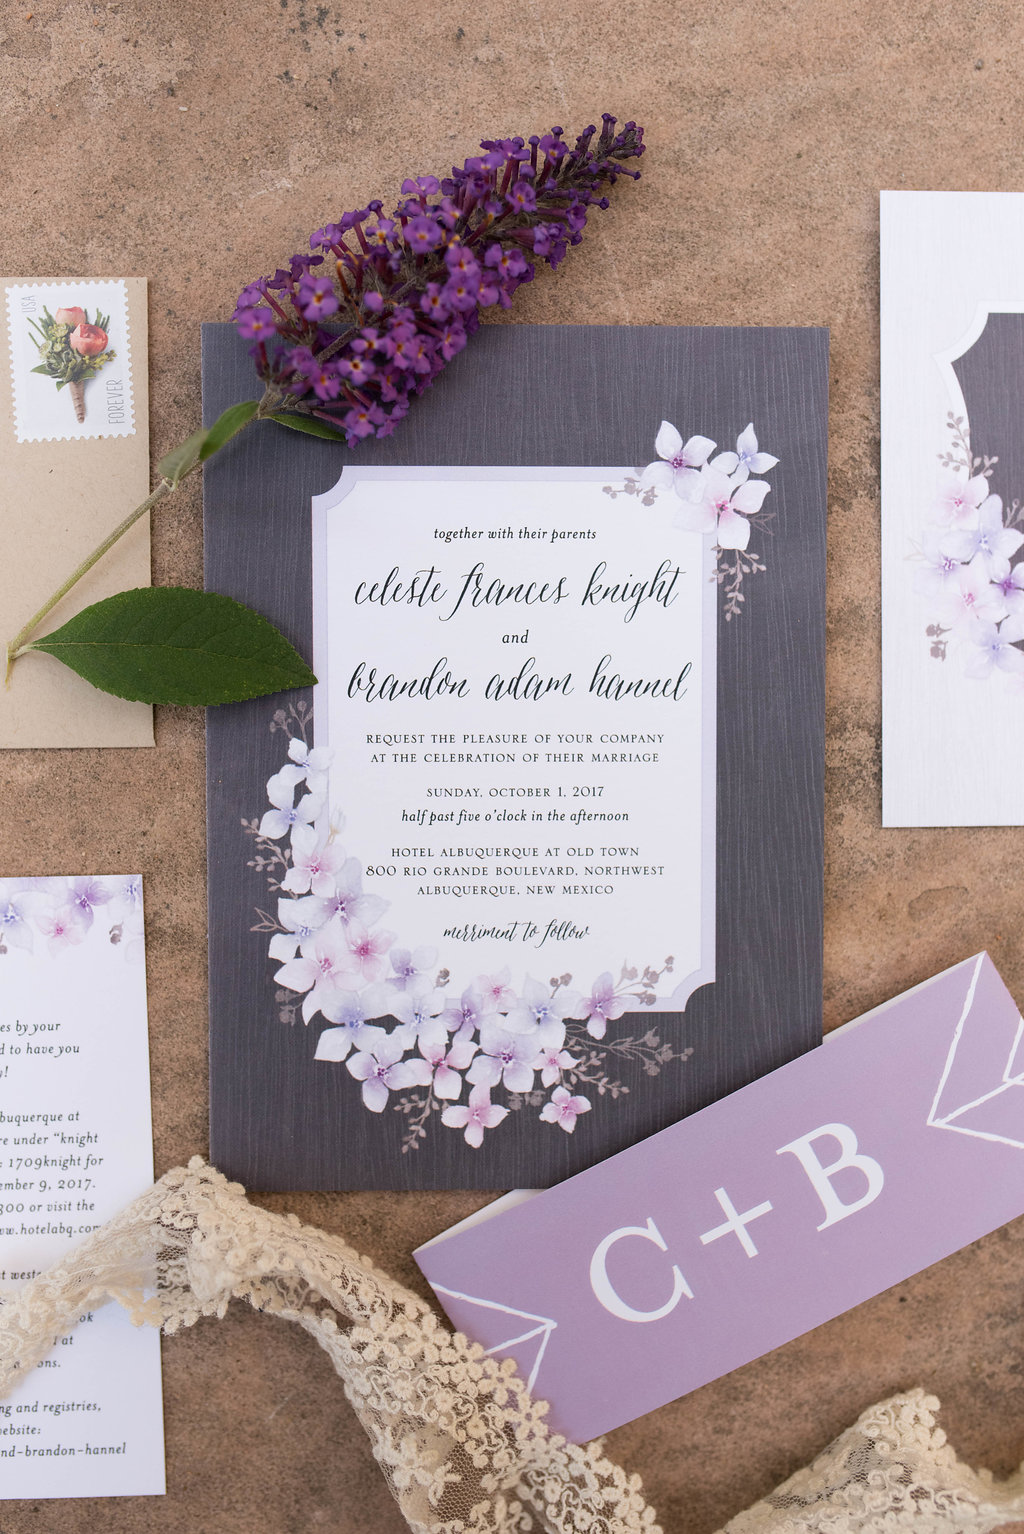 Perfect Wedding Guide New Mexico Albuquerque Santa Fe planning design inspo inspiration photography local marriage love engagement ceremony wedding invitation paper hyacinth lavender floral details pretty modern traditional